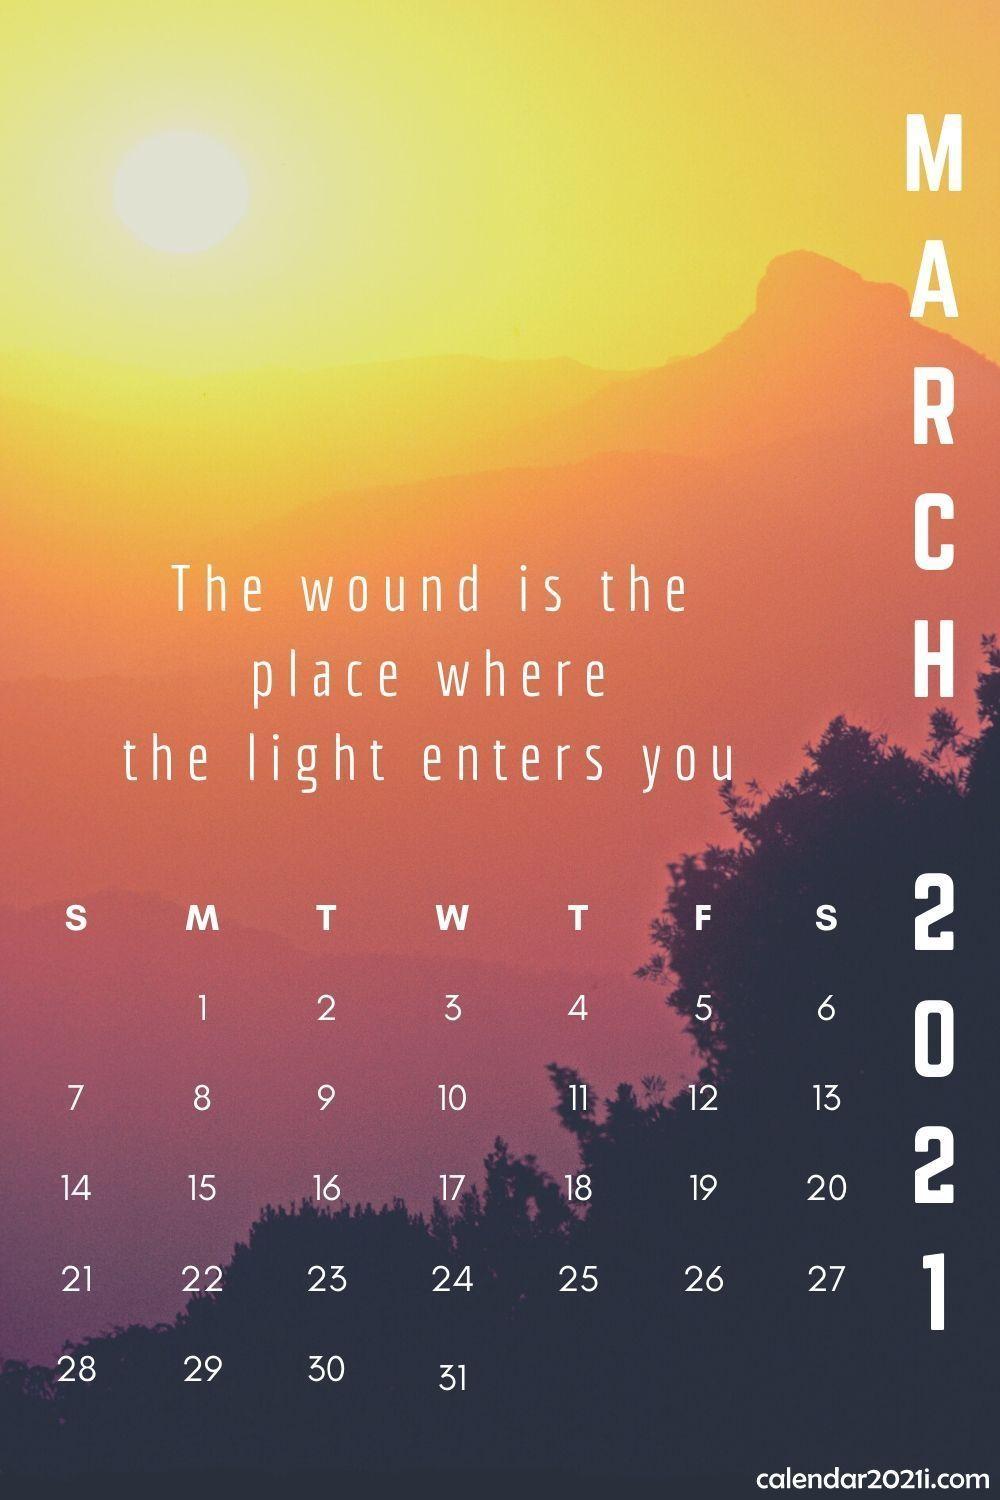 March 2021 Calendar Wallpapers Top Free March 2021